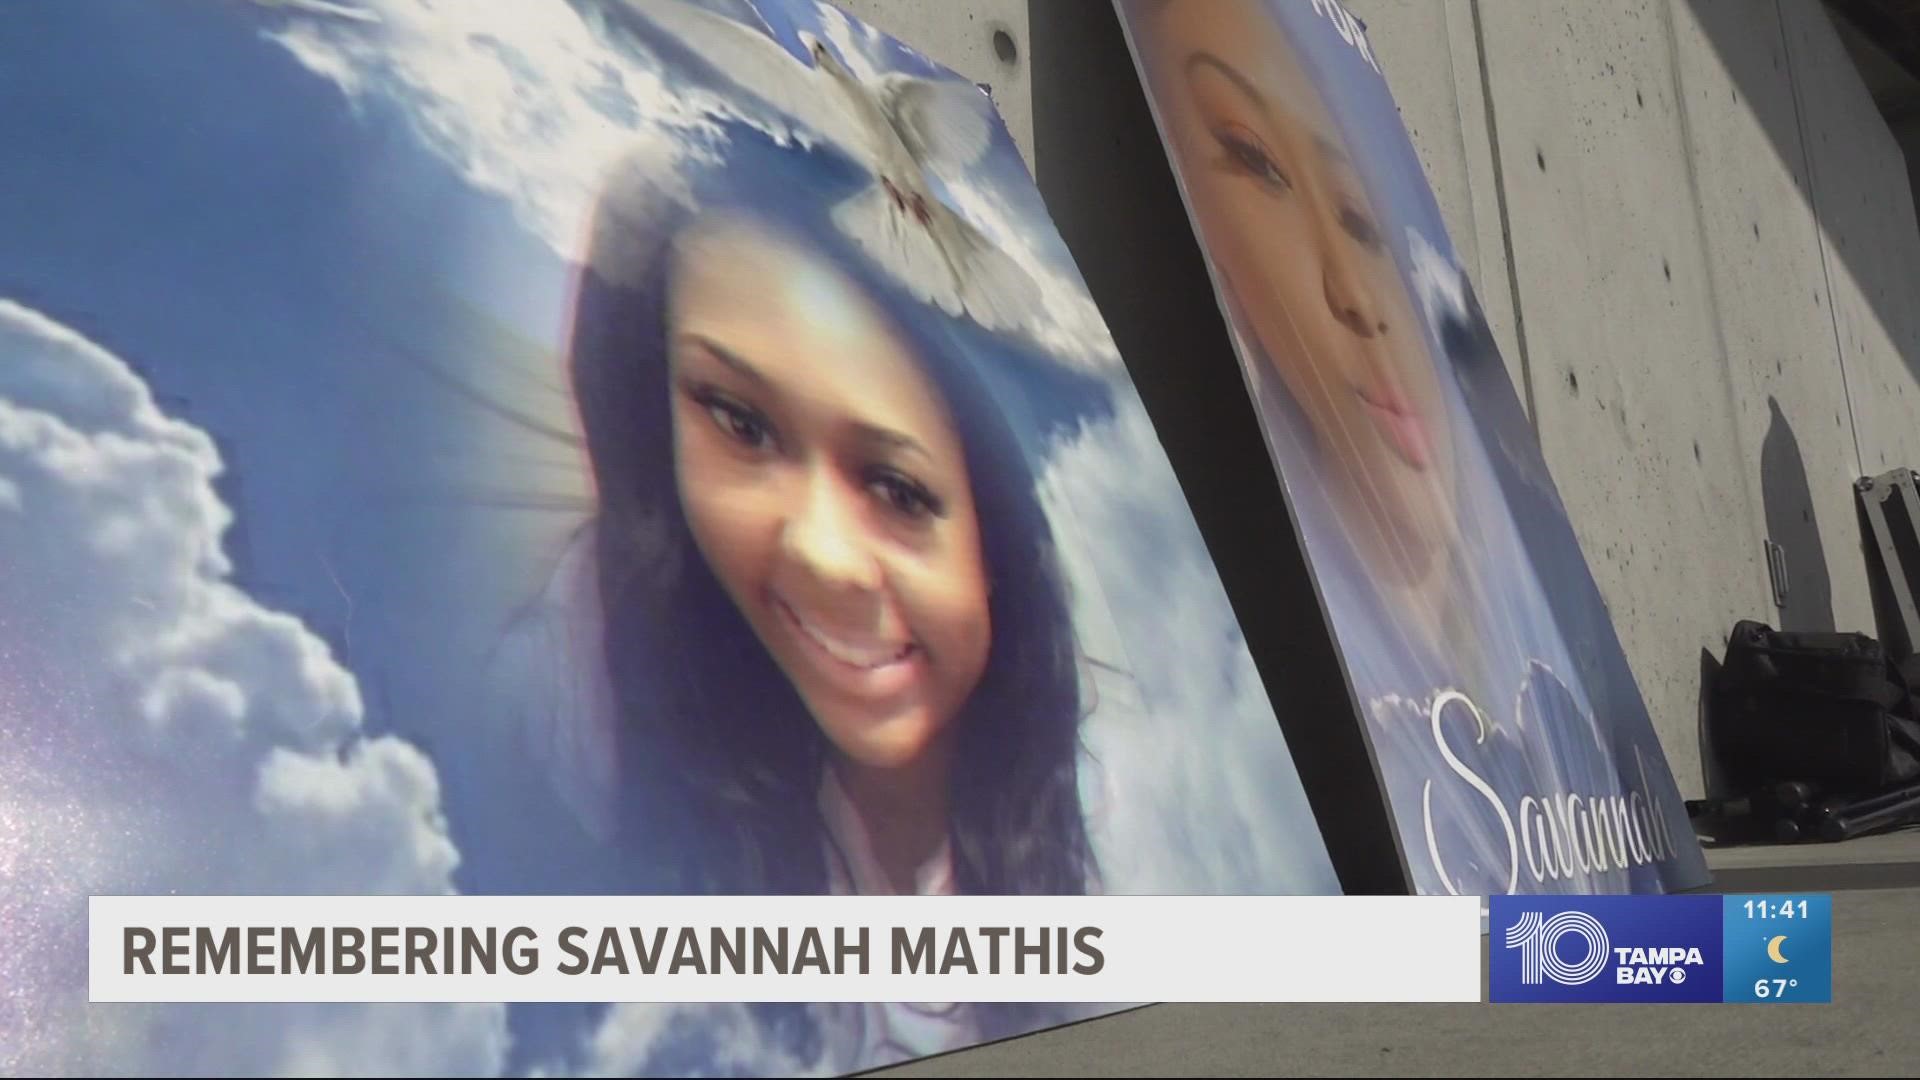 Mathis's mother said she was in the wrong place at the wrong time she was shot and killed driving near Julian B Lane Park.